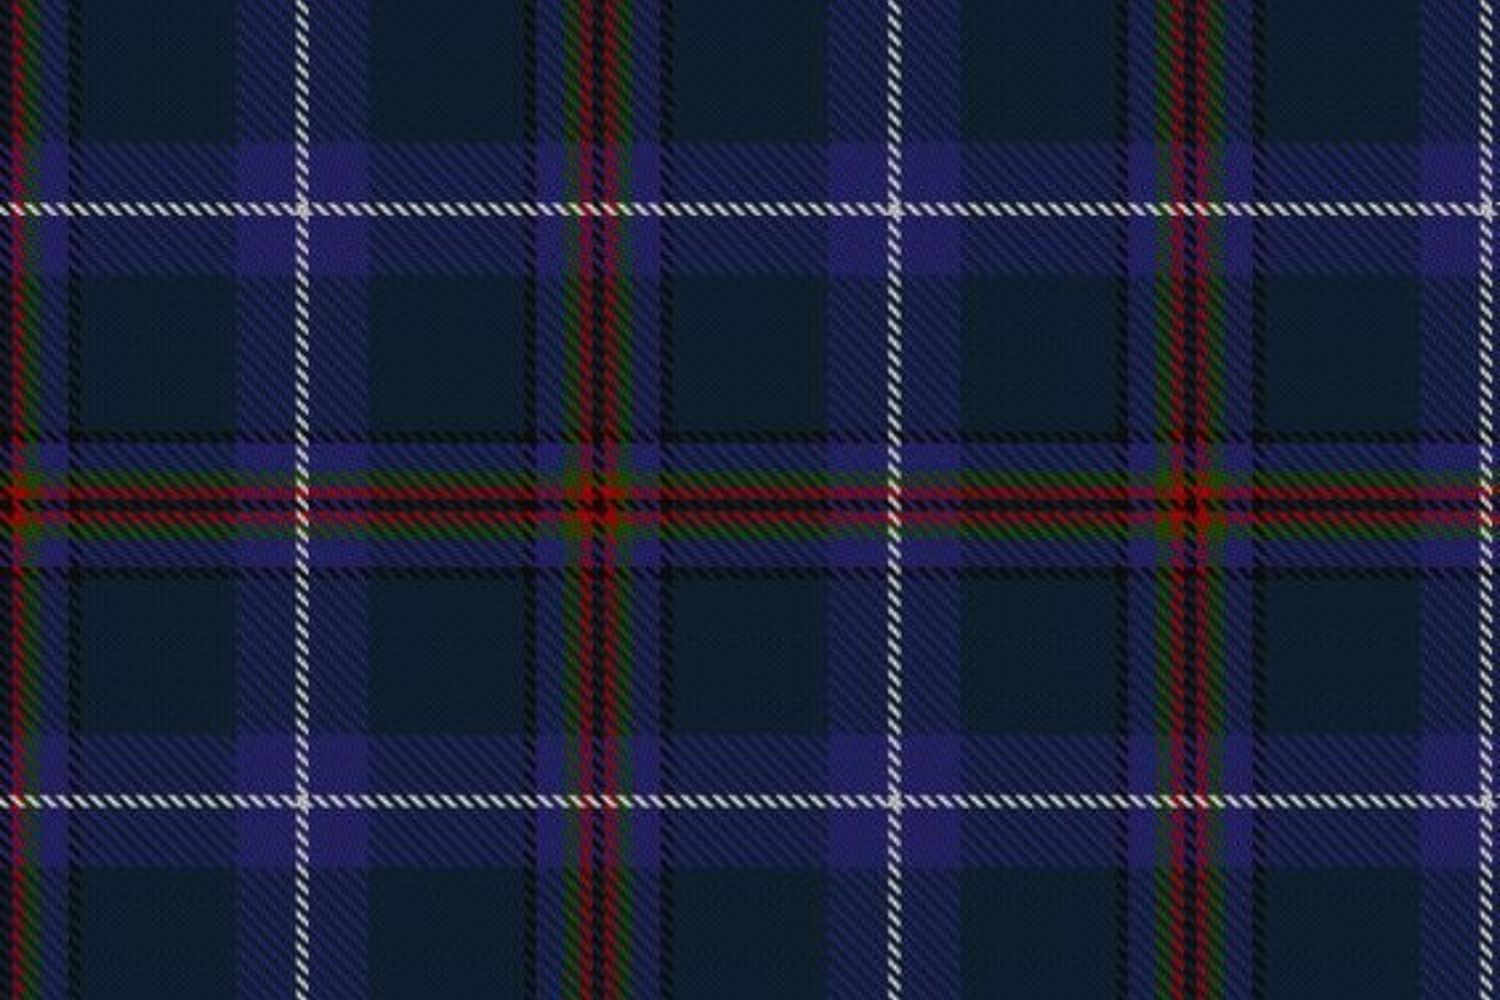 Cultural Exchange | The Intersection of Tradition and Fashion in American Kilts